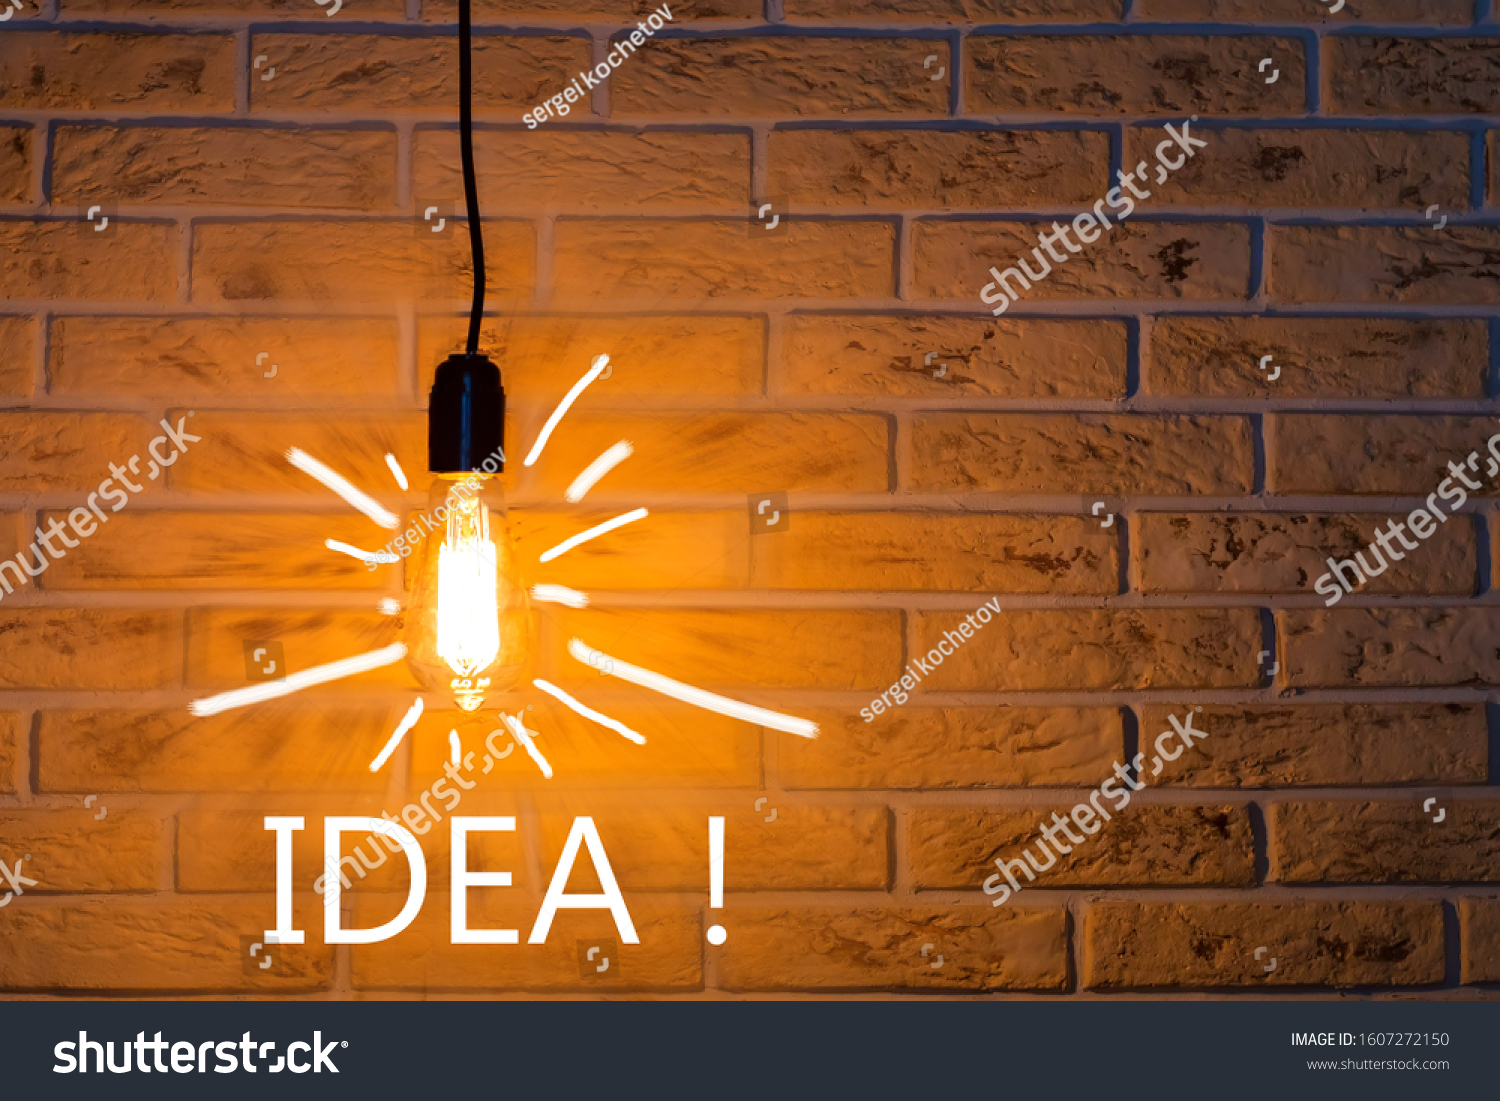 Vintage fashionable edison lamp on brick background with an inscription idea . Creative idea concept, designer lamp, modern interior item. Lighting, electricity, background with lamp. #1607272150